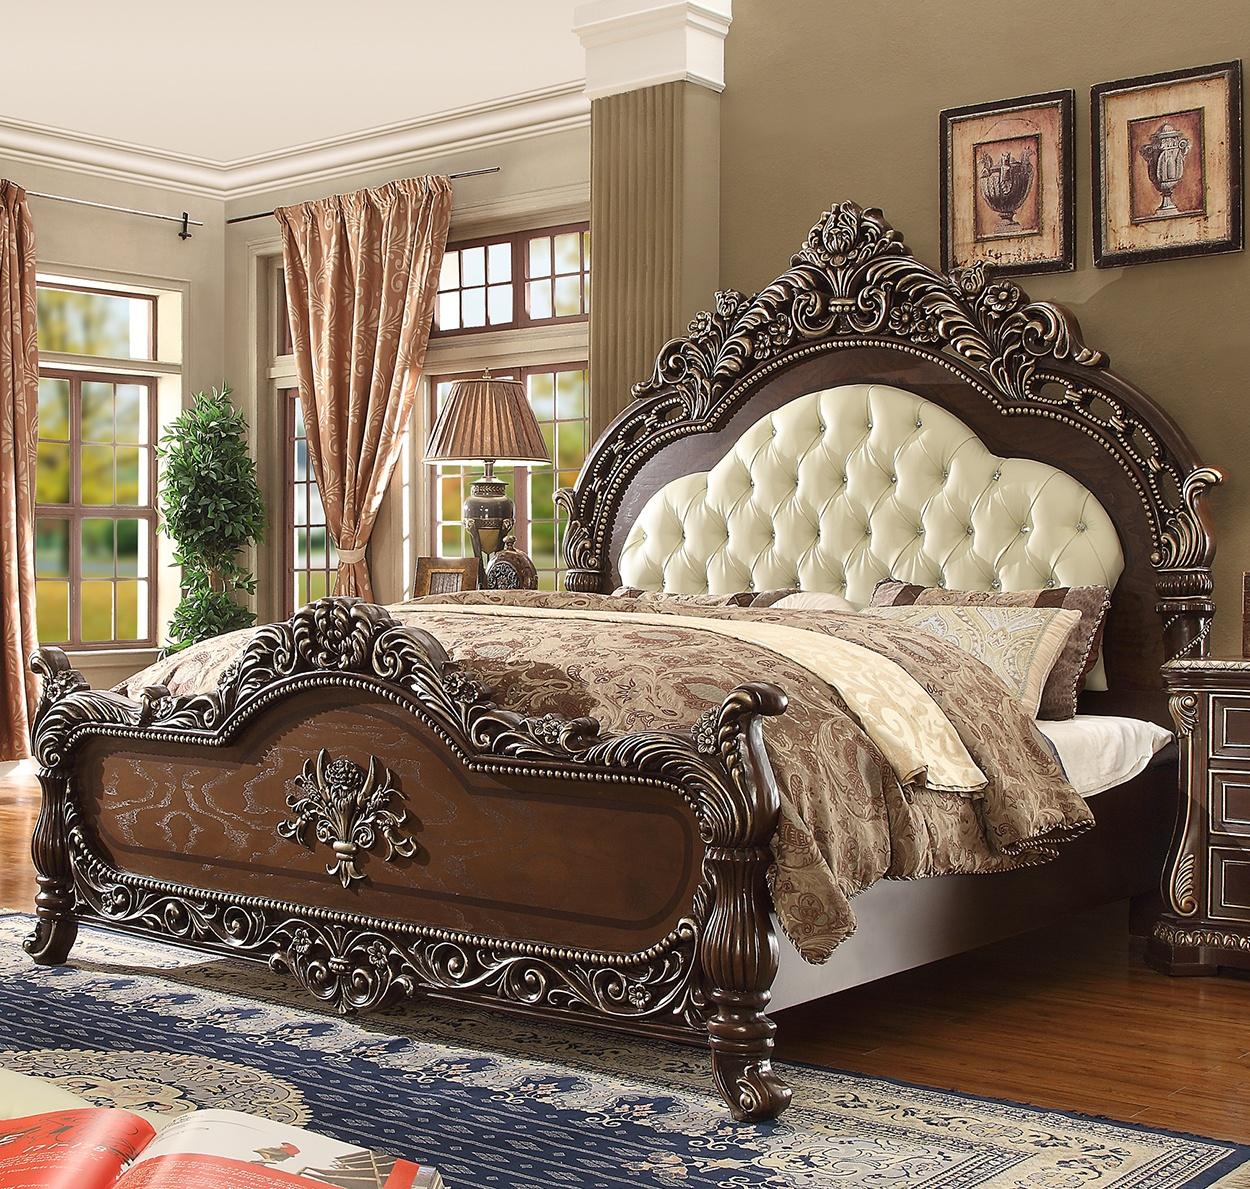 Traditional Panel Bed HD-8013 HD-8013 CK BED in Cherry, Cream, Brown Leather